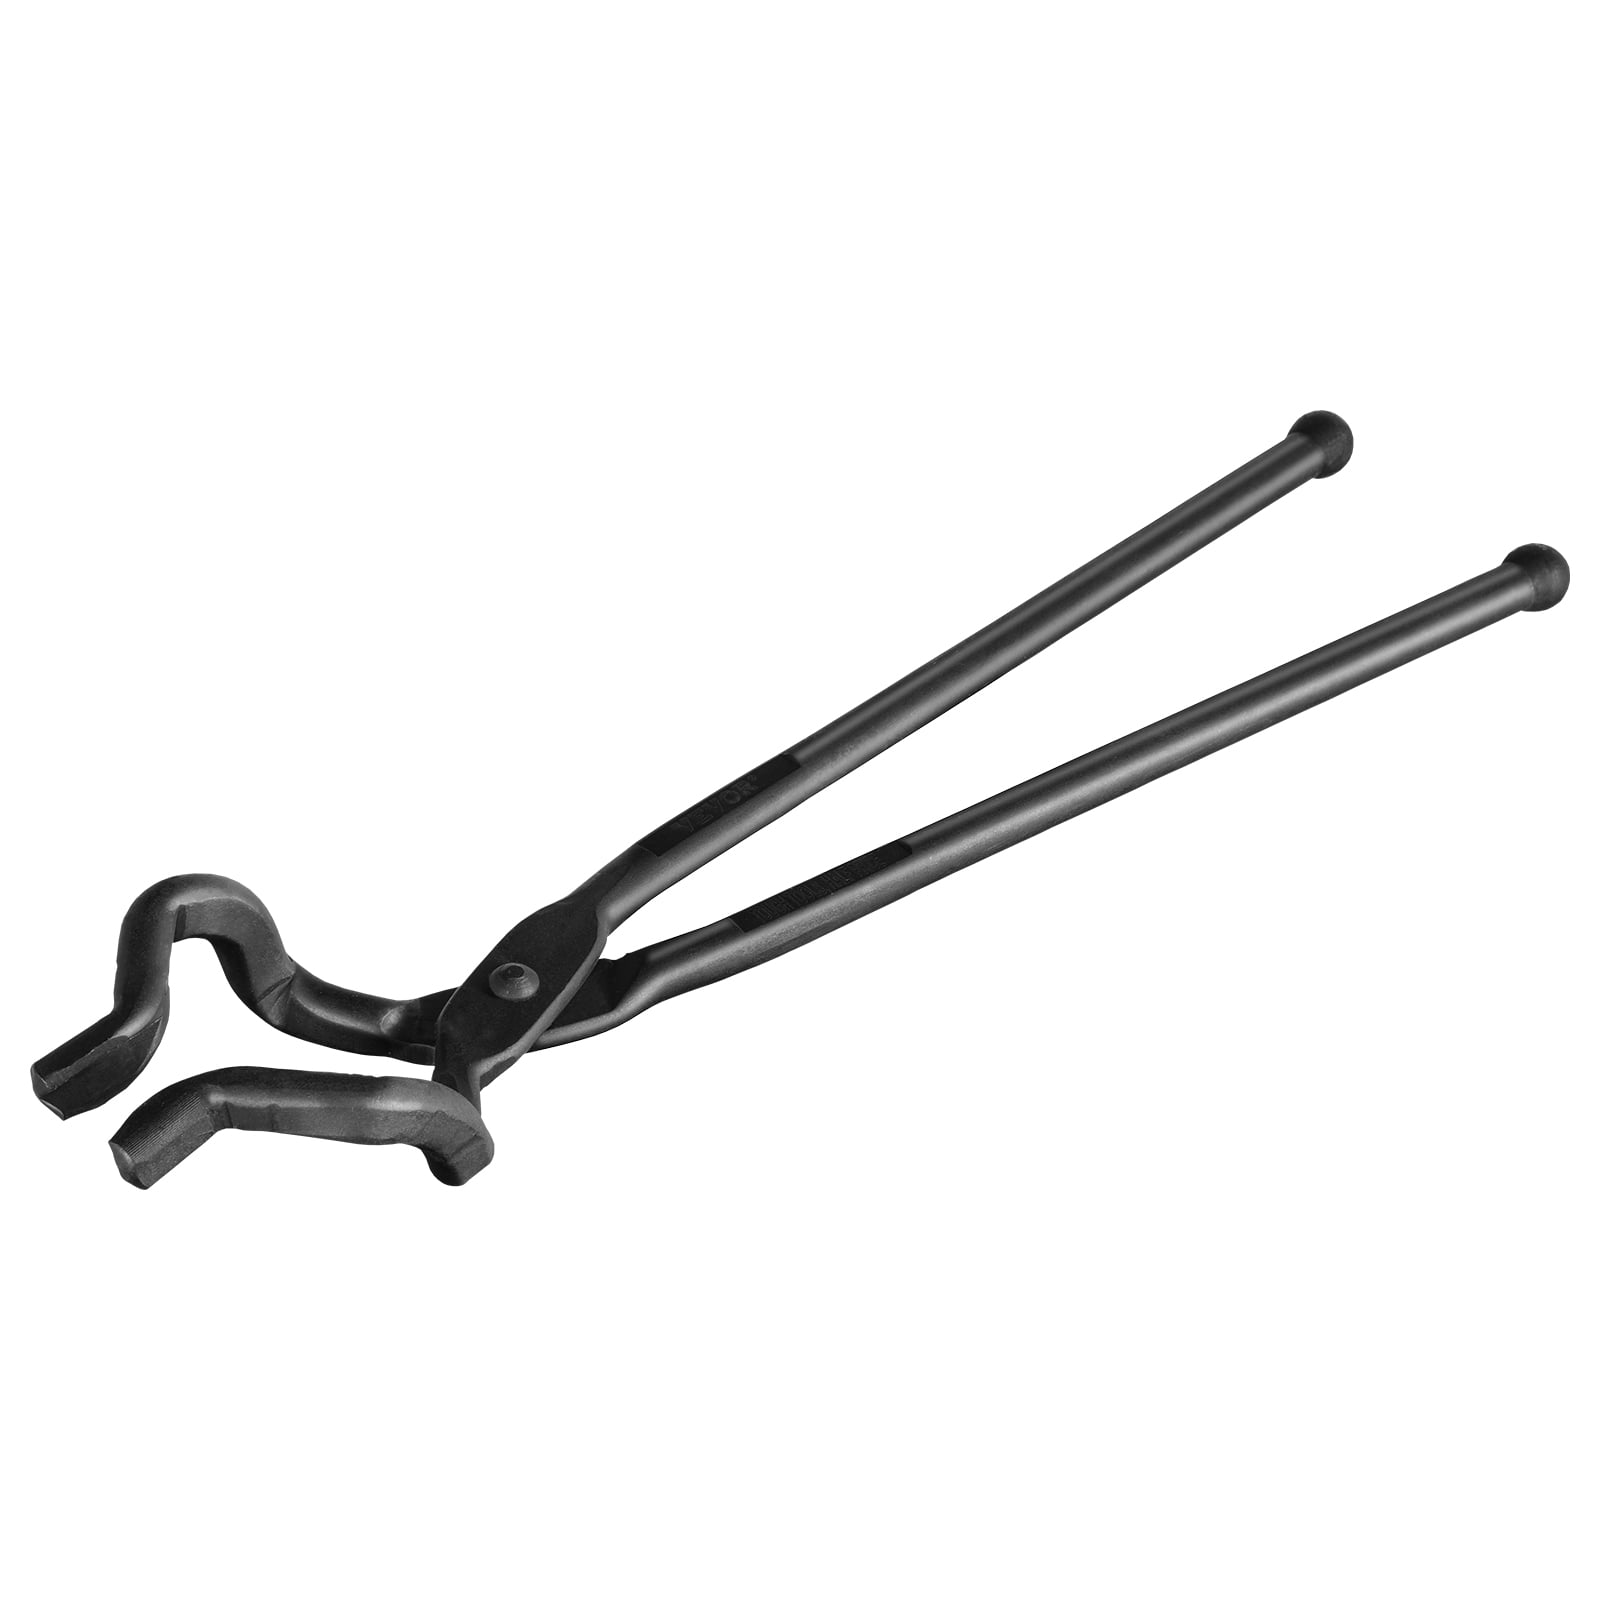 Bentism Blacksmith Tongs, 18 Wolf Jaw Tongs, Carbon Steel Forge Tongs with A3 Steel Rivets, for Horseshoes, Curved Shapes, Block Forgings, for